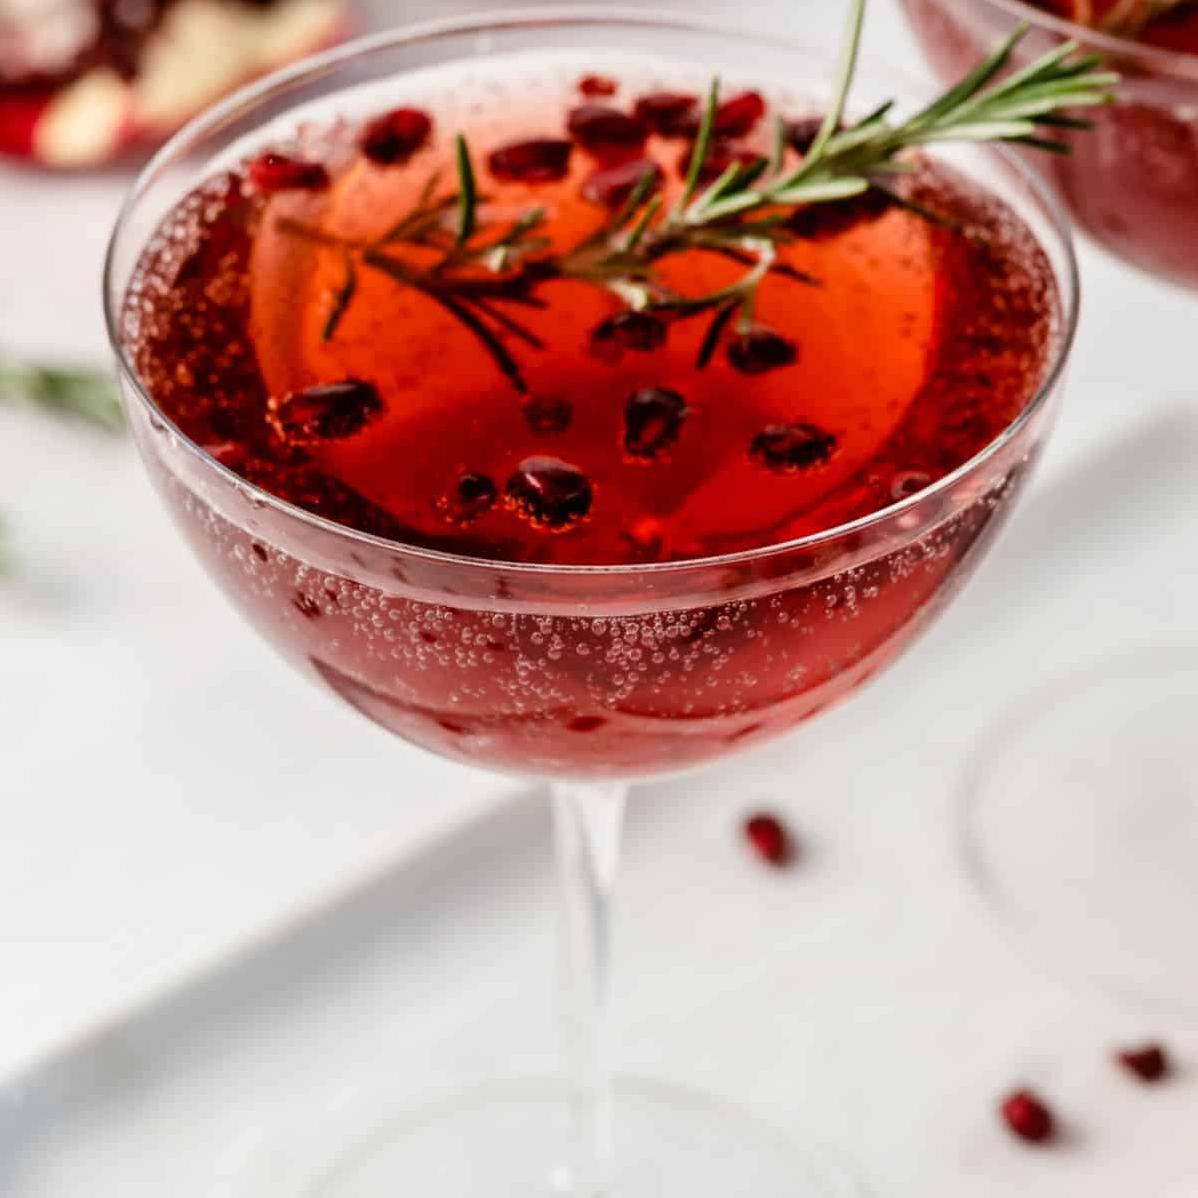  Bursting with flavor, this champagne cocktail is a must-try!